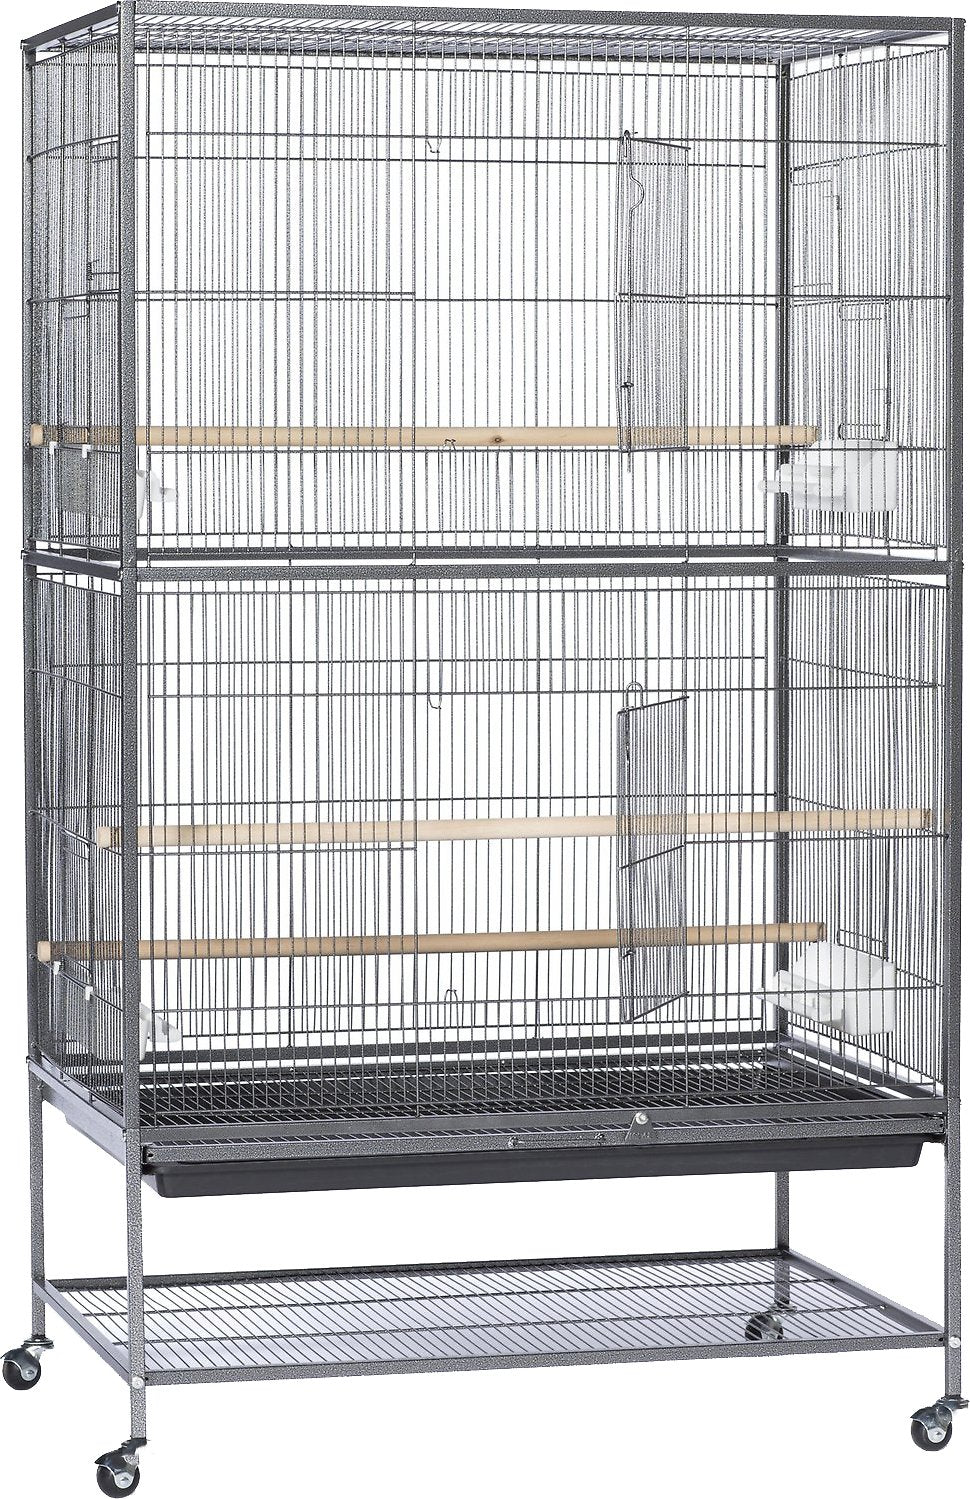 Canine's World Parrot Cages Pet Products Wrought Iron Small & Medium Birds Flight Cage, Black Hammertone Prevue Pet Products